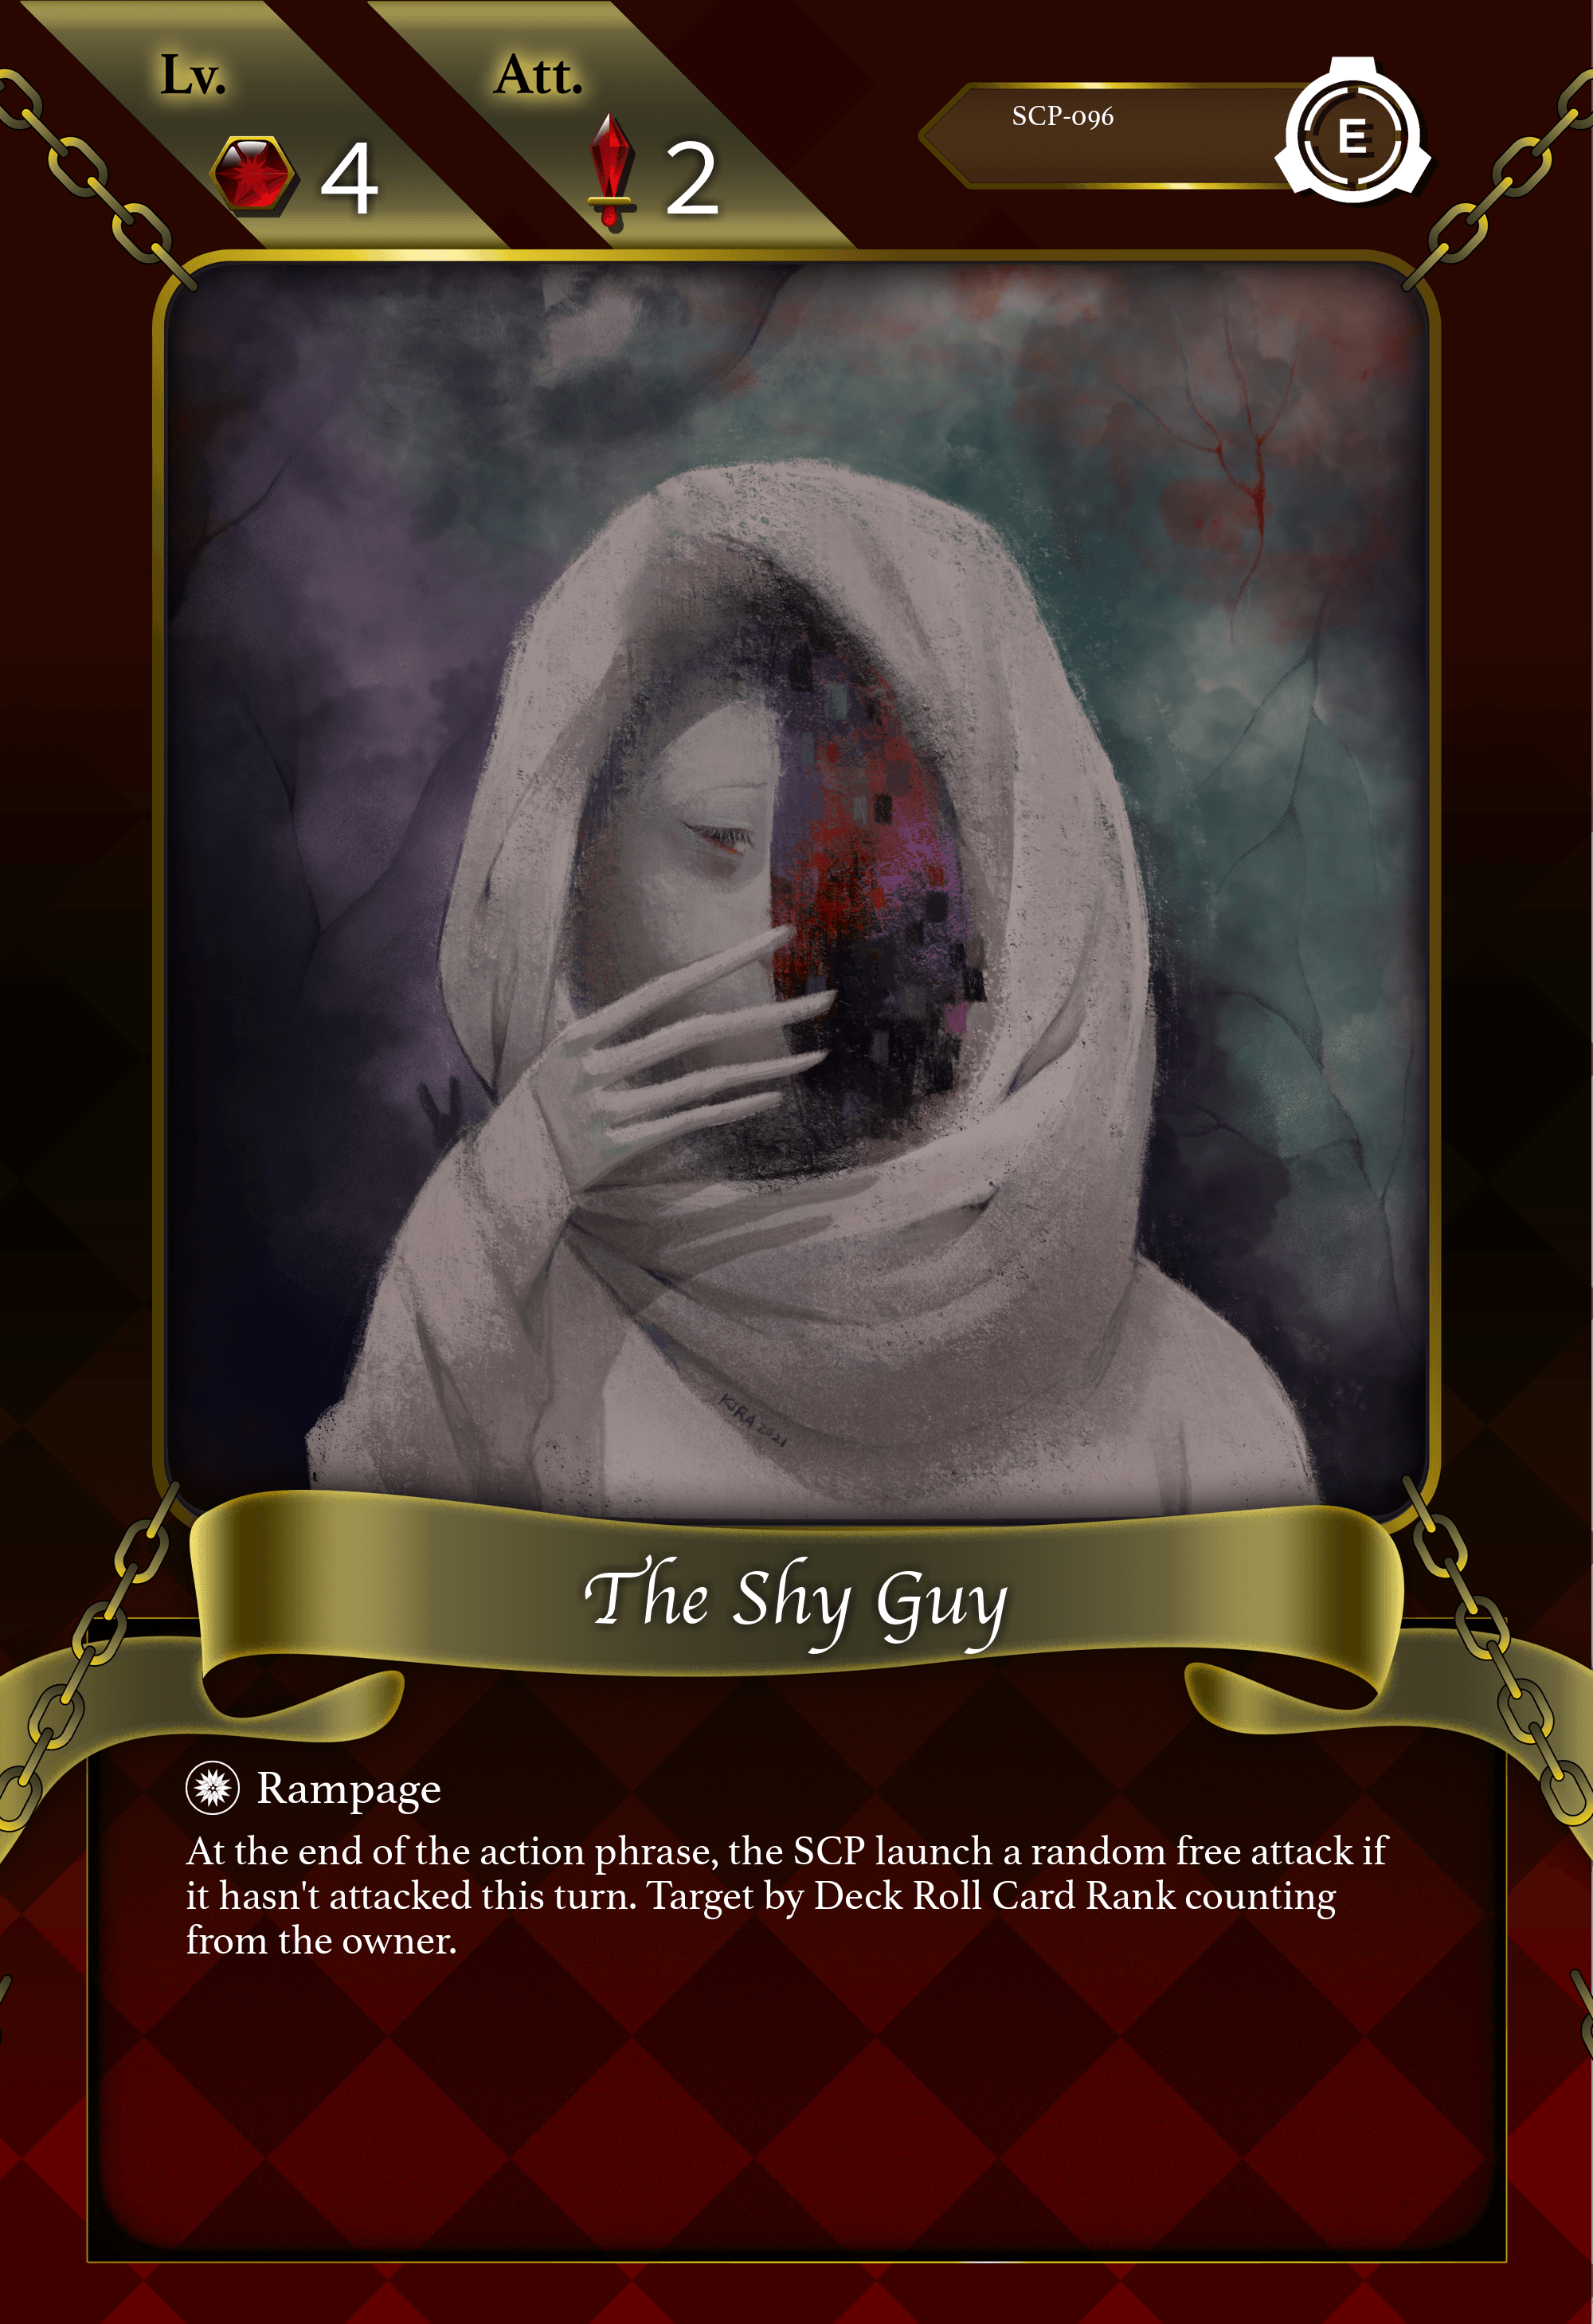 SCP-3812]A Voice Behind Me - SCP: End of Magic - Official Card